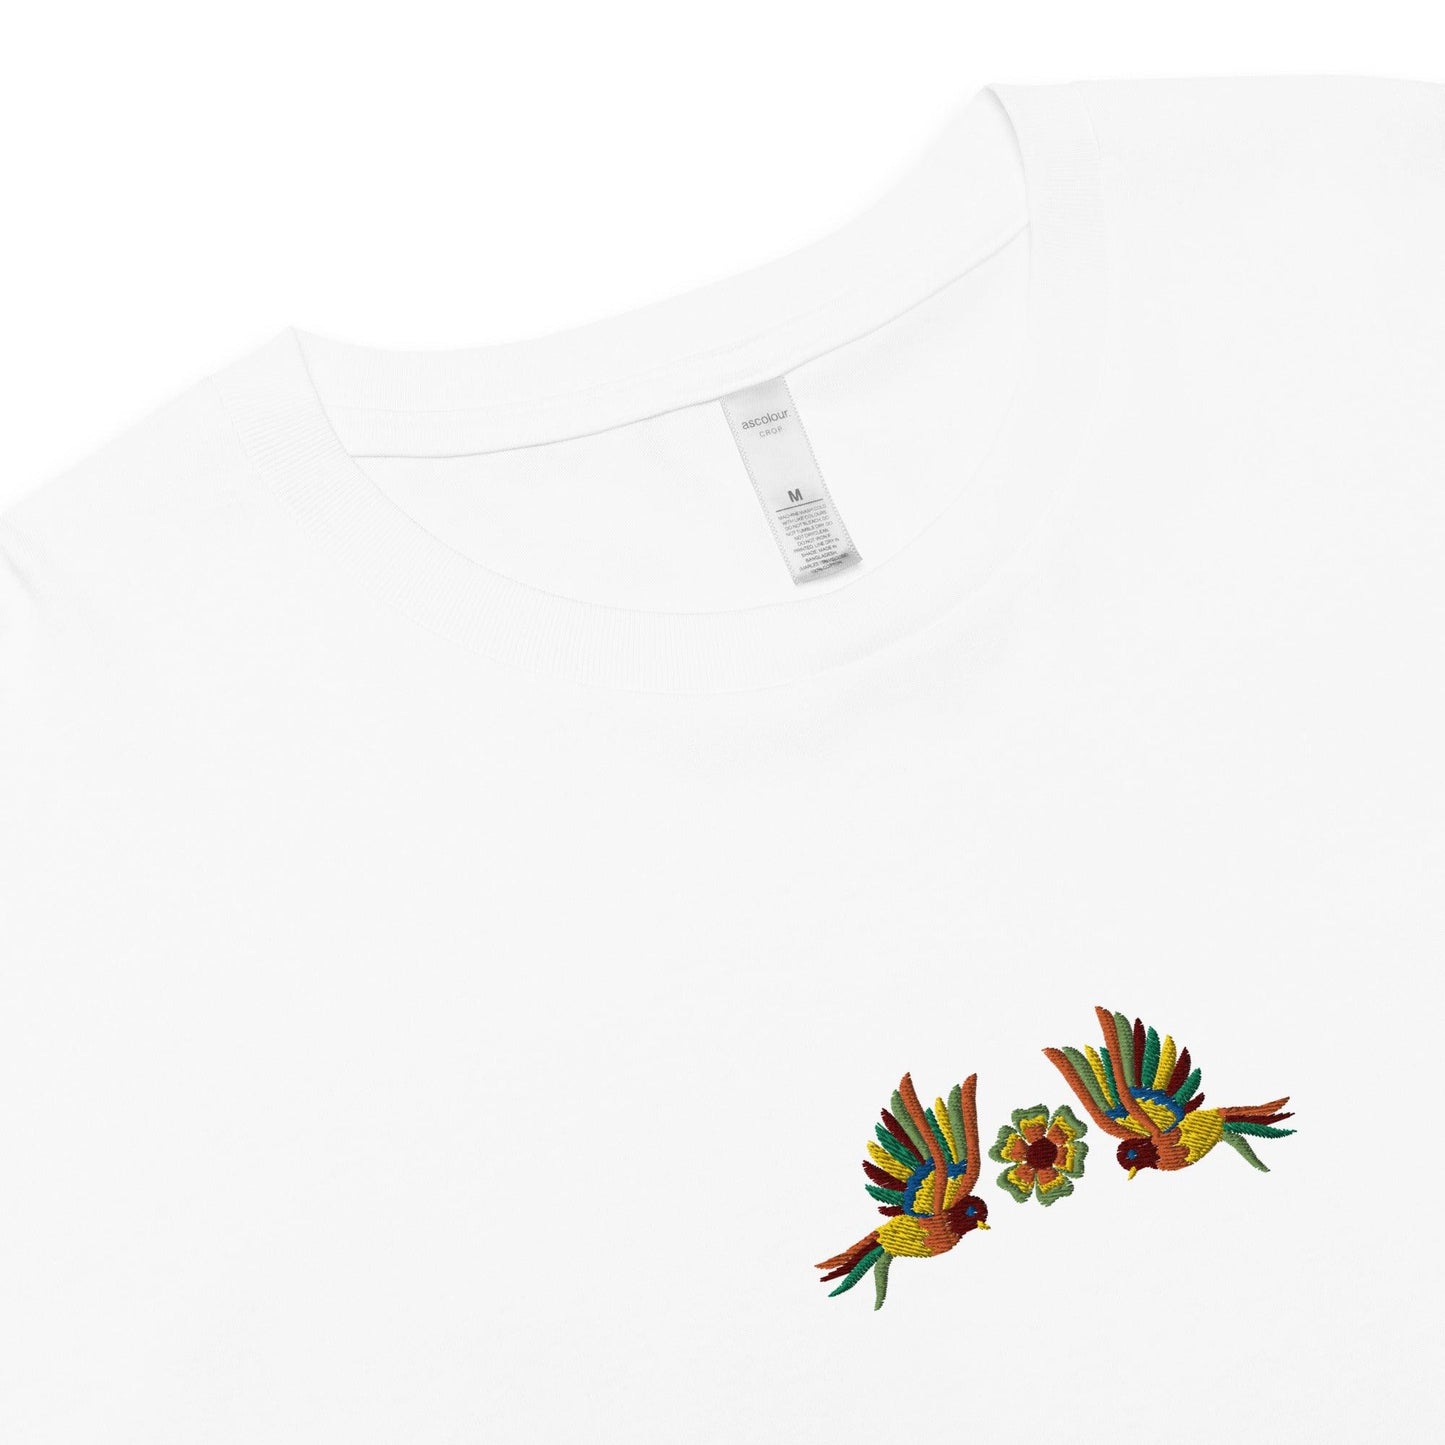 Mexican Otomi Embroidered Cropped T-Shirt - The Global Wanderer